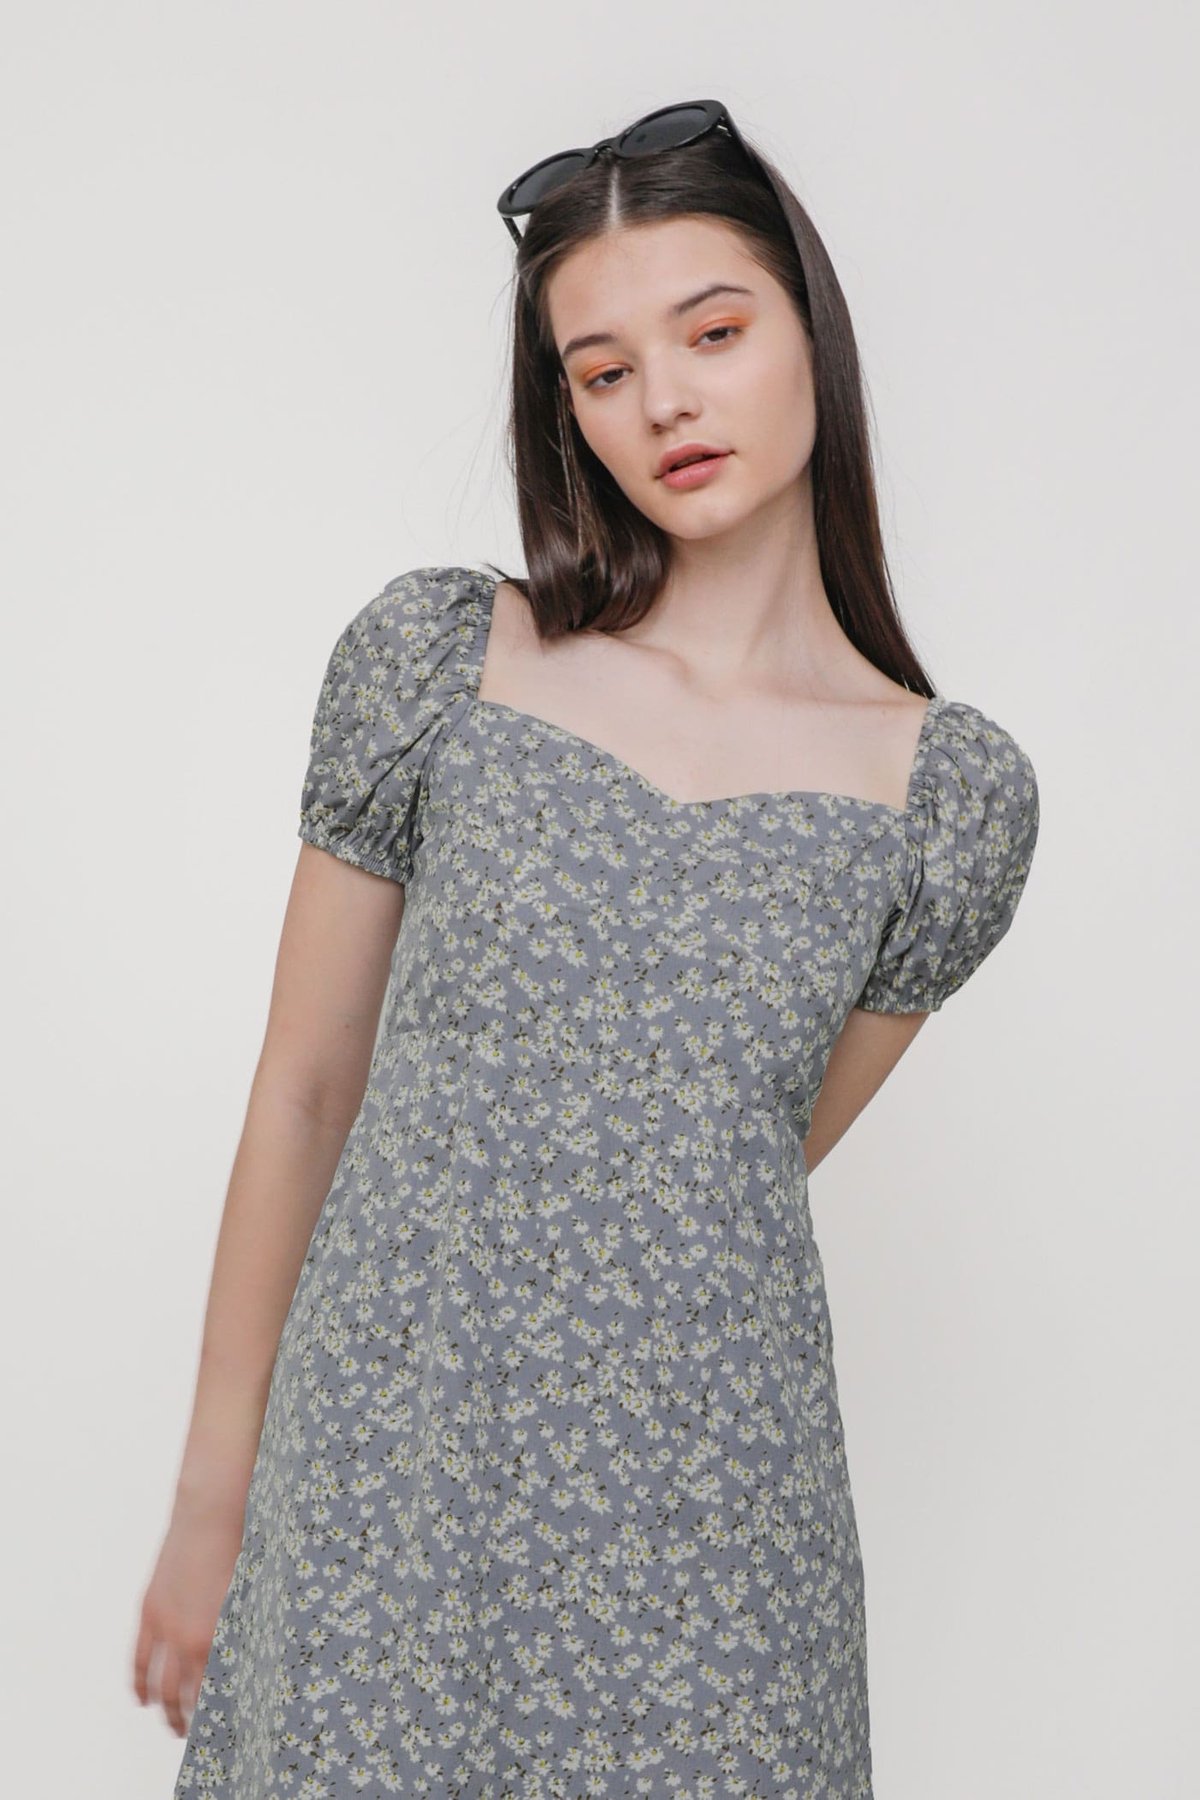 Emily Puffy Sleeve Dress (Periwinkle Daisies)